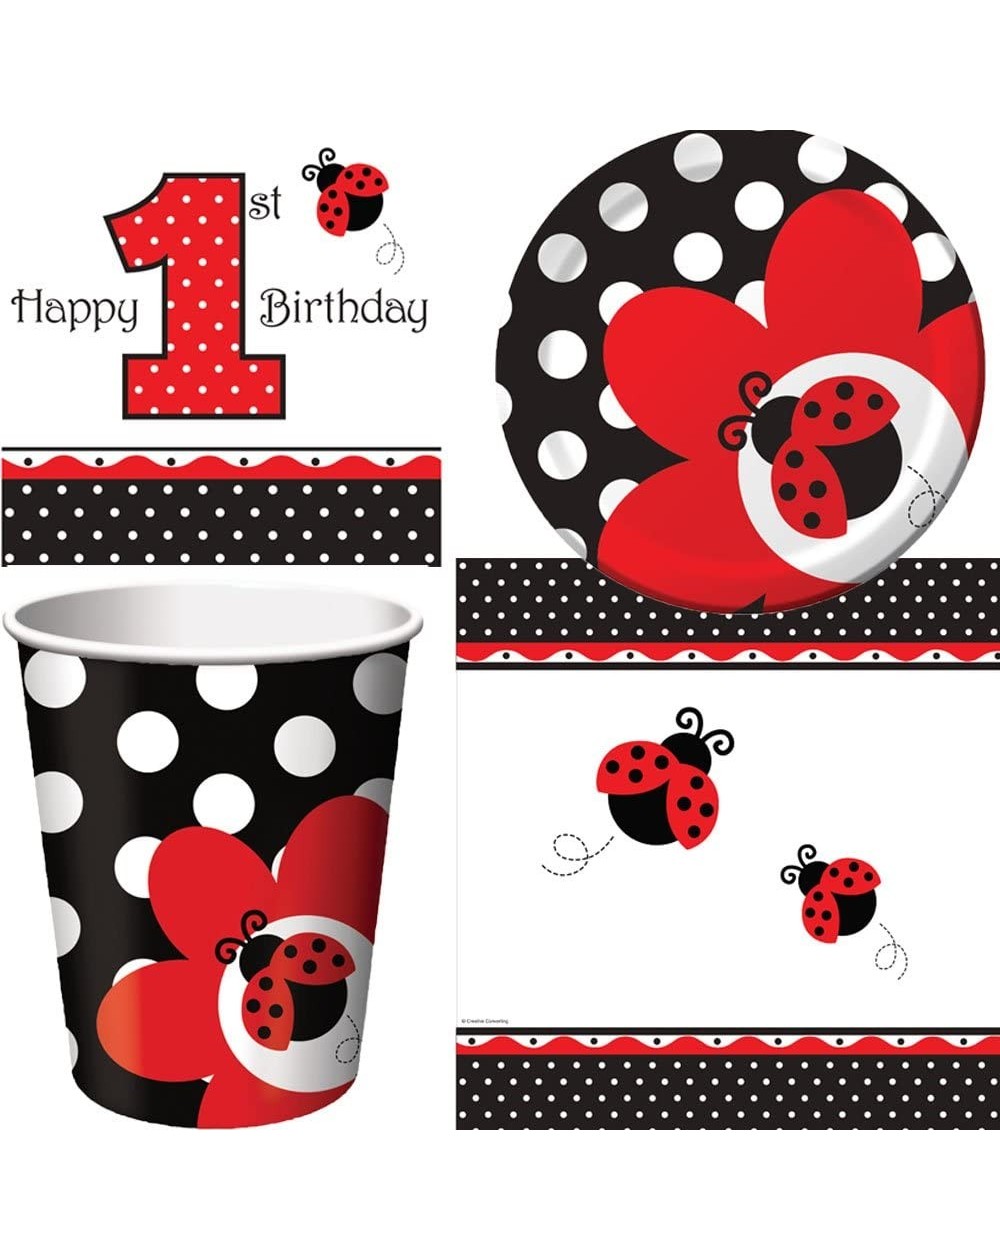 Party Packs Ladybug Fancy Birthday Party Supplies For 16 Guests - Includes 16 Paper Lunch Napkins- 16 Paper Dessert Plates- 1...